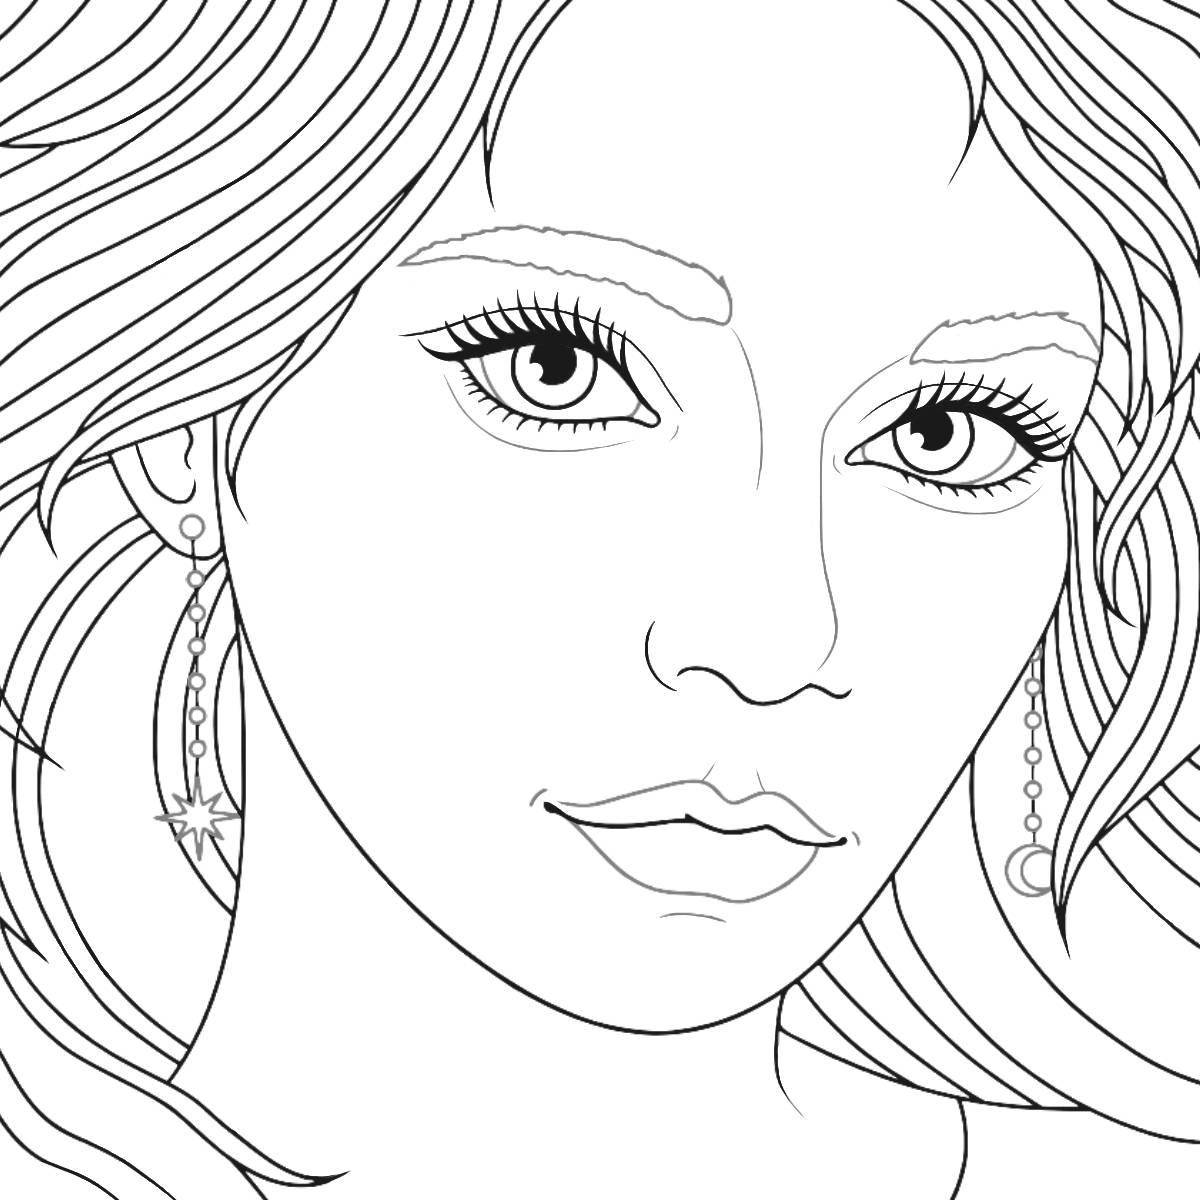 Creative makeup face coloring book for kids